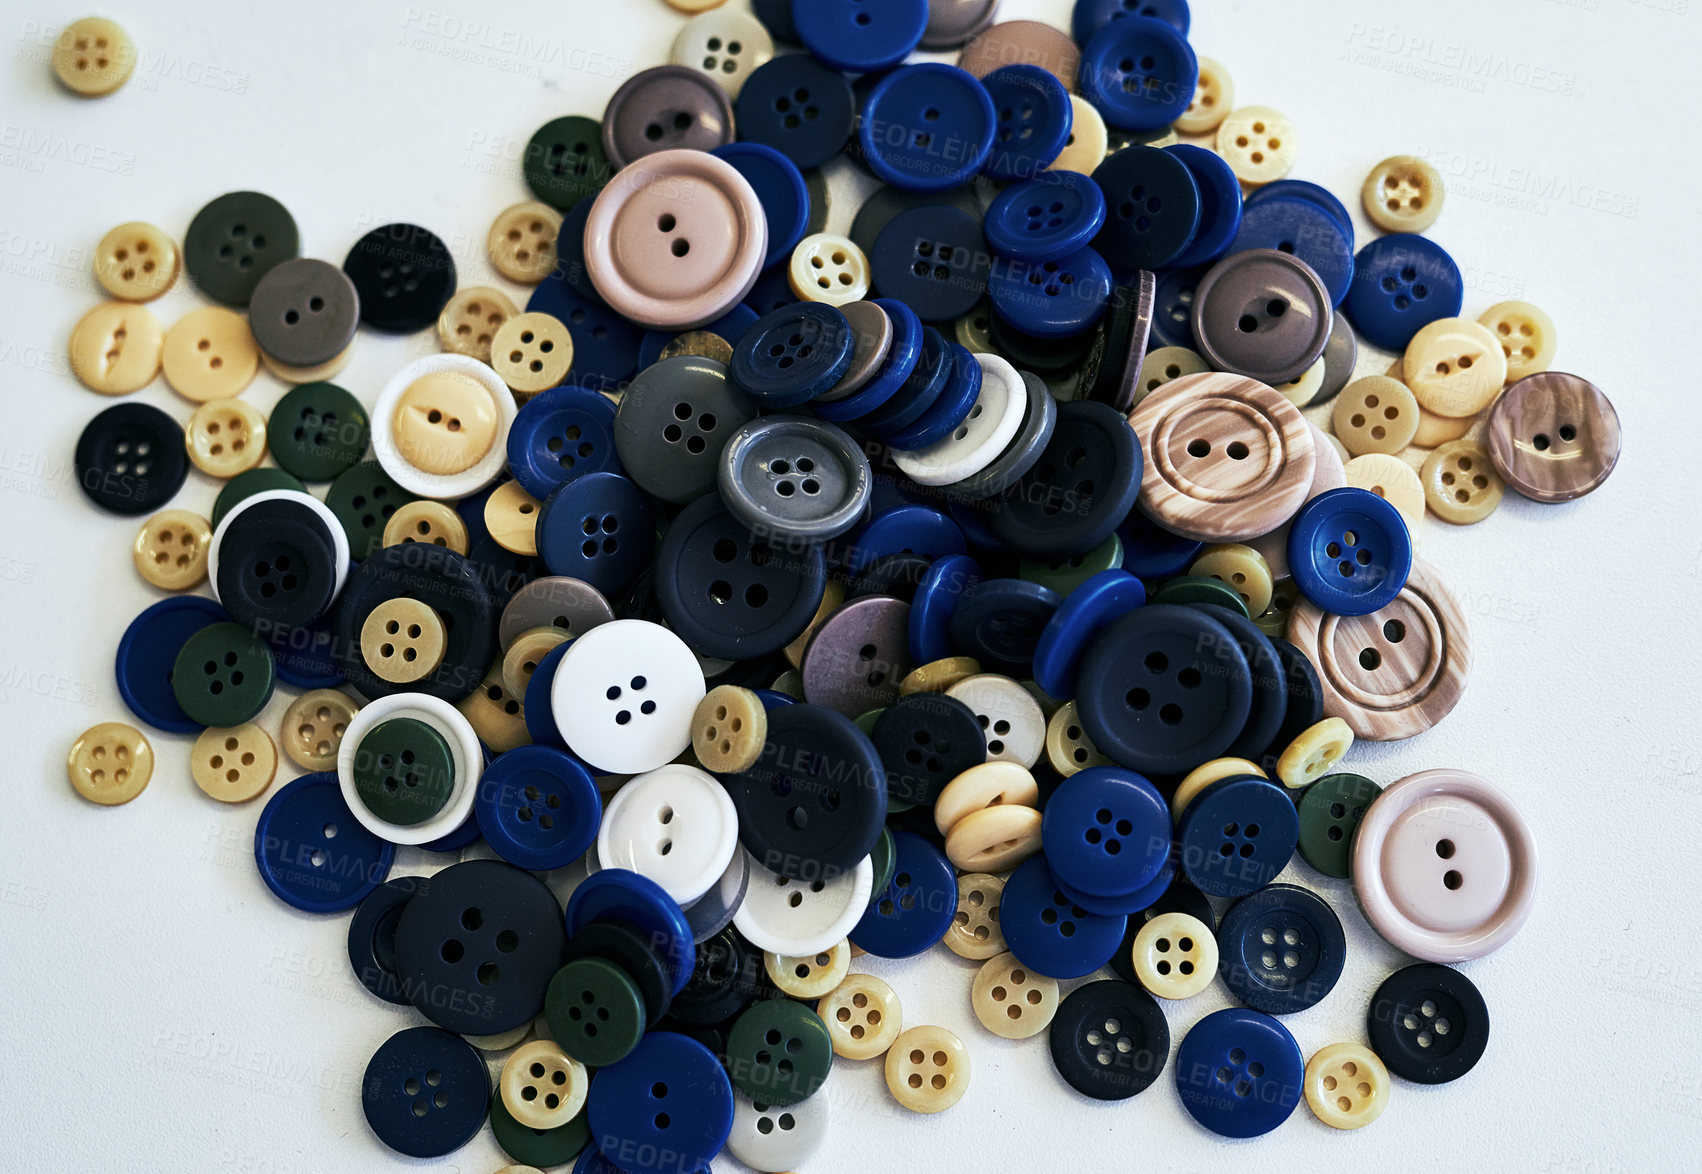 Buy stock photo Shot of sewing buttons laying on a white background